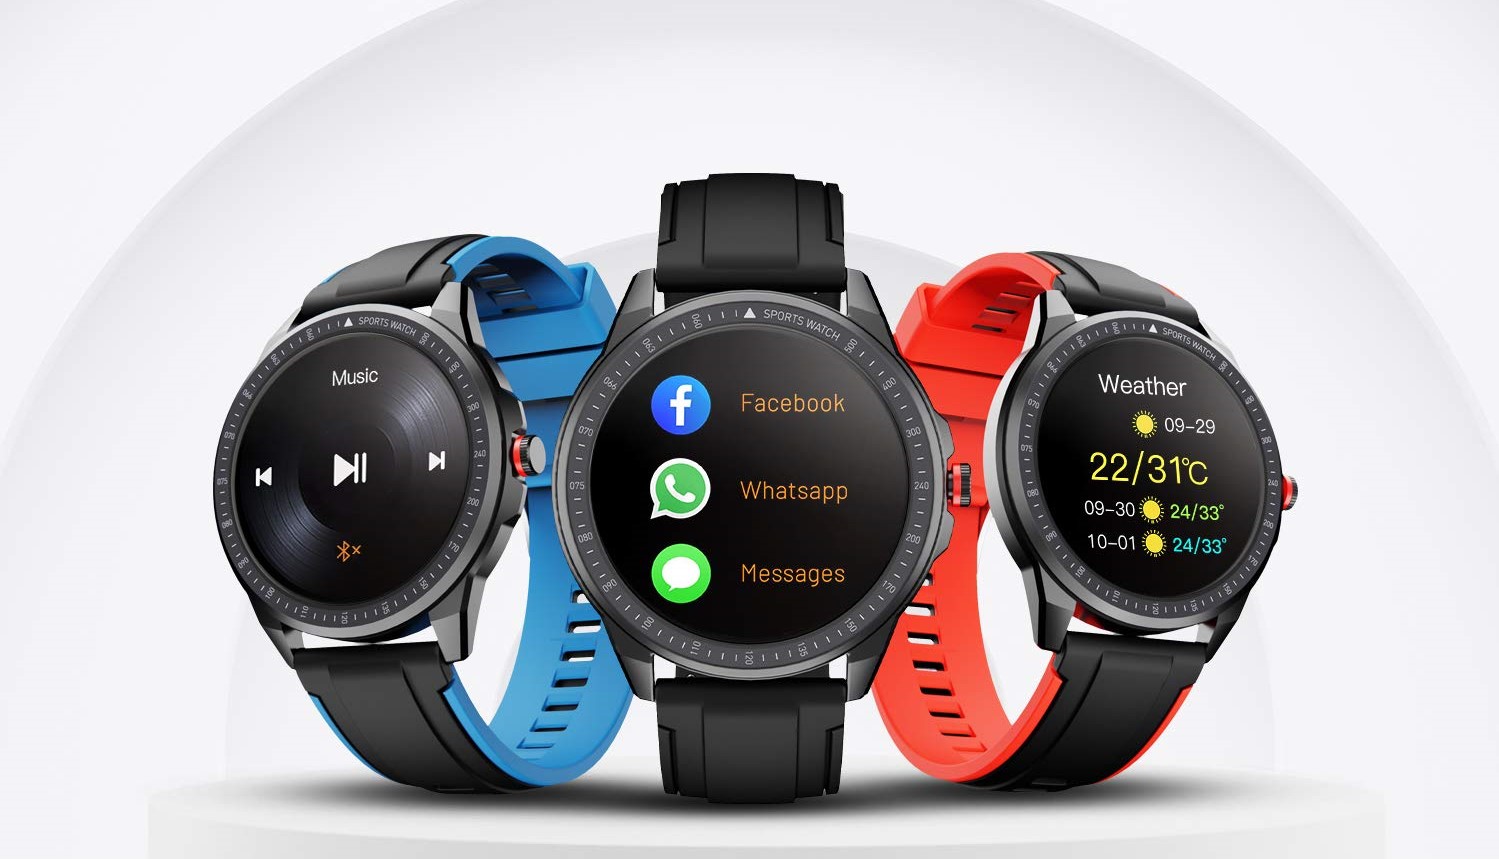 Boat launches new smartwatch with LCD display, SpO2 monitoring; costs Rs 2,499